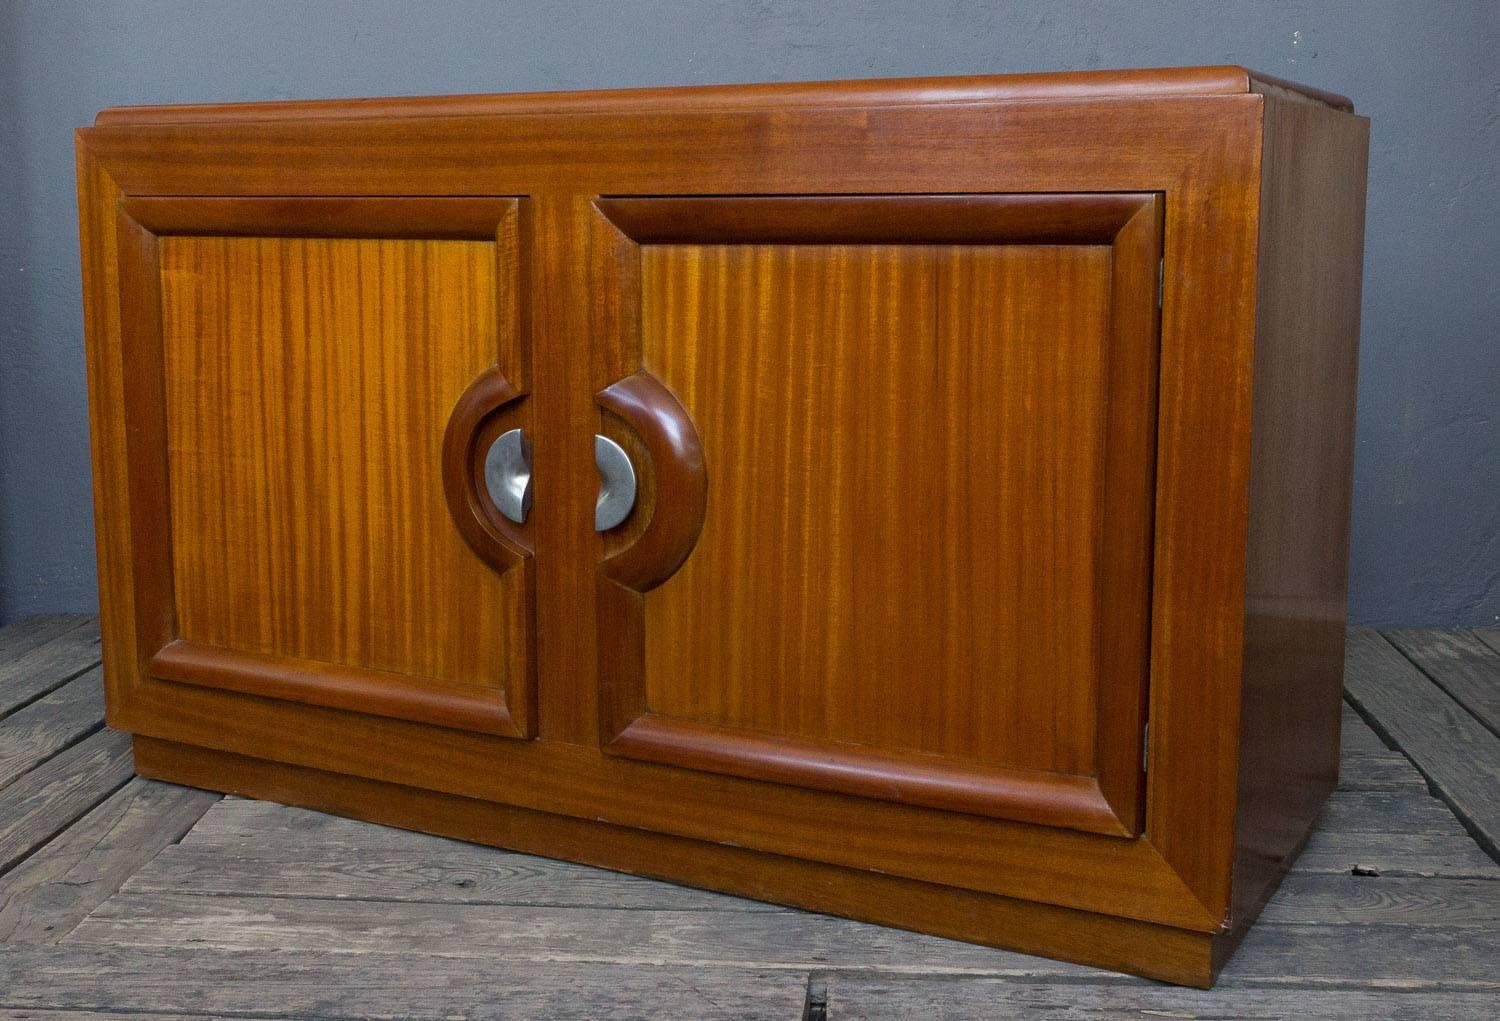 Mahogany server by Paul Laszlo. Interior divided with two compartments; one shelf on the left and four pull-out drawers on the right side. Discounted price is final net.